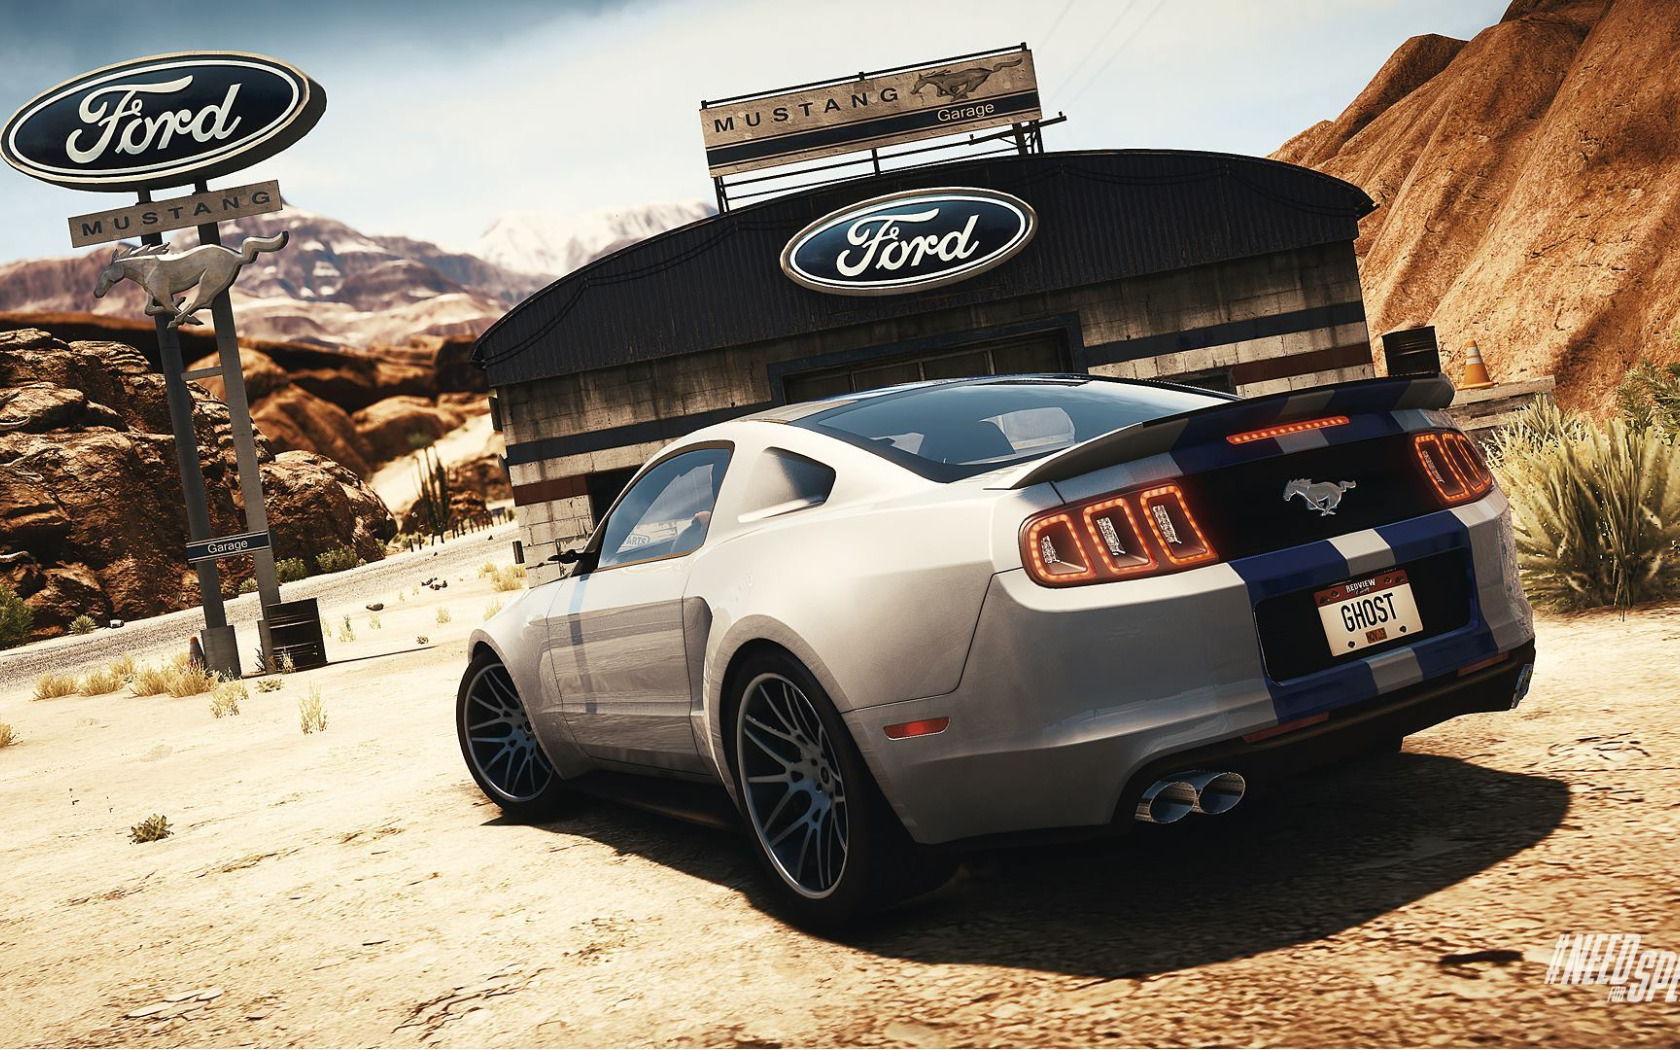 Ford Mustang gt 500 NFS Rivals. Ford Mustang gt 2014 NFS Rivals. NFS 2015 Ford Mustang gt. Ford Mustang gt NFS Rivals. Форд мустанг нфс